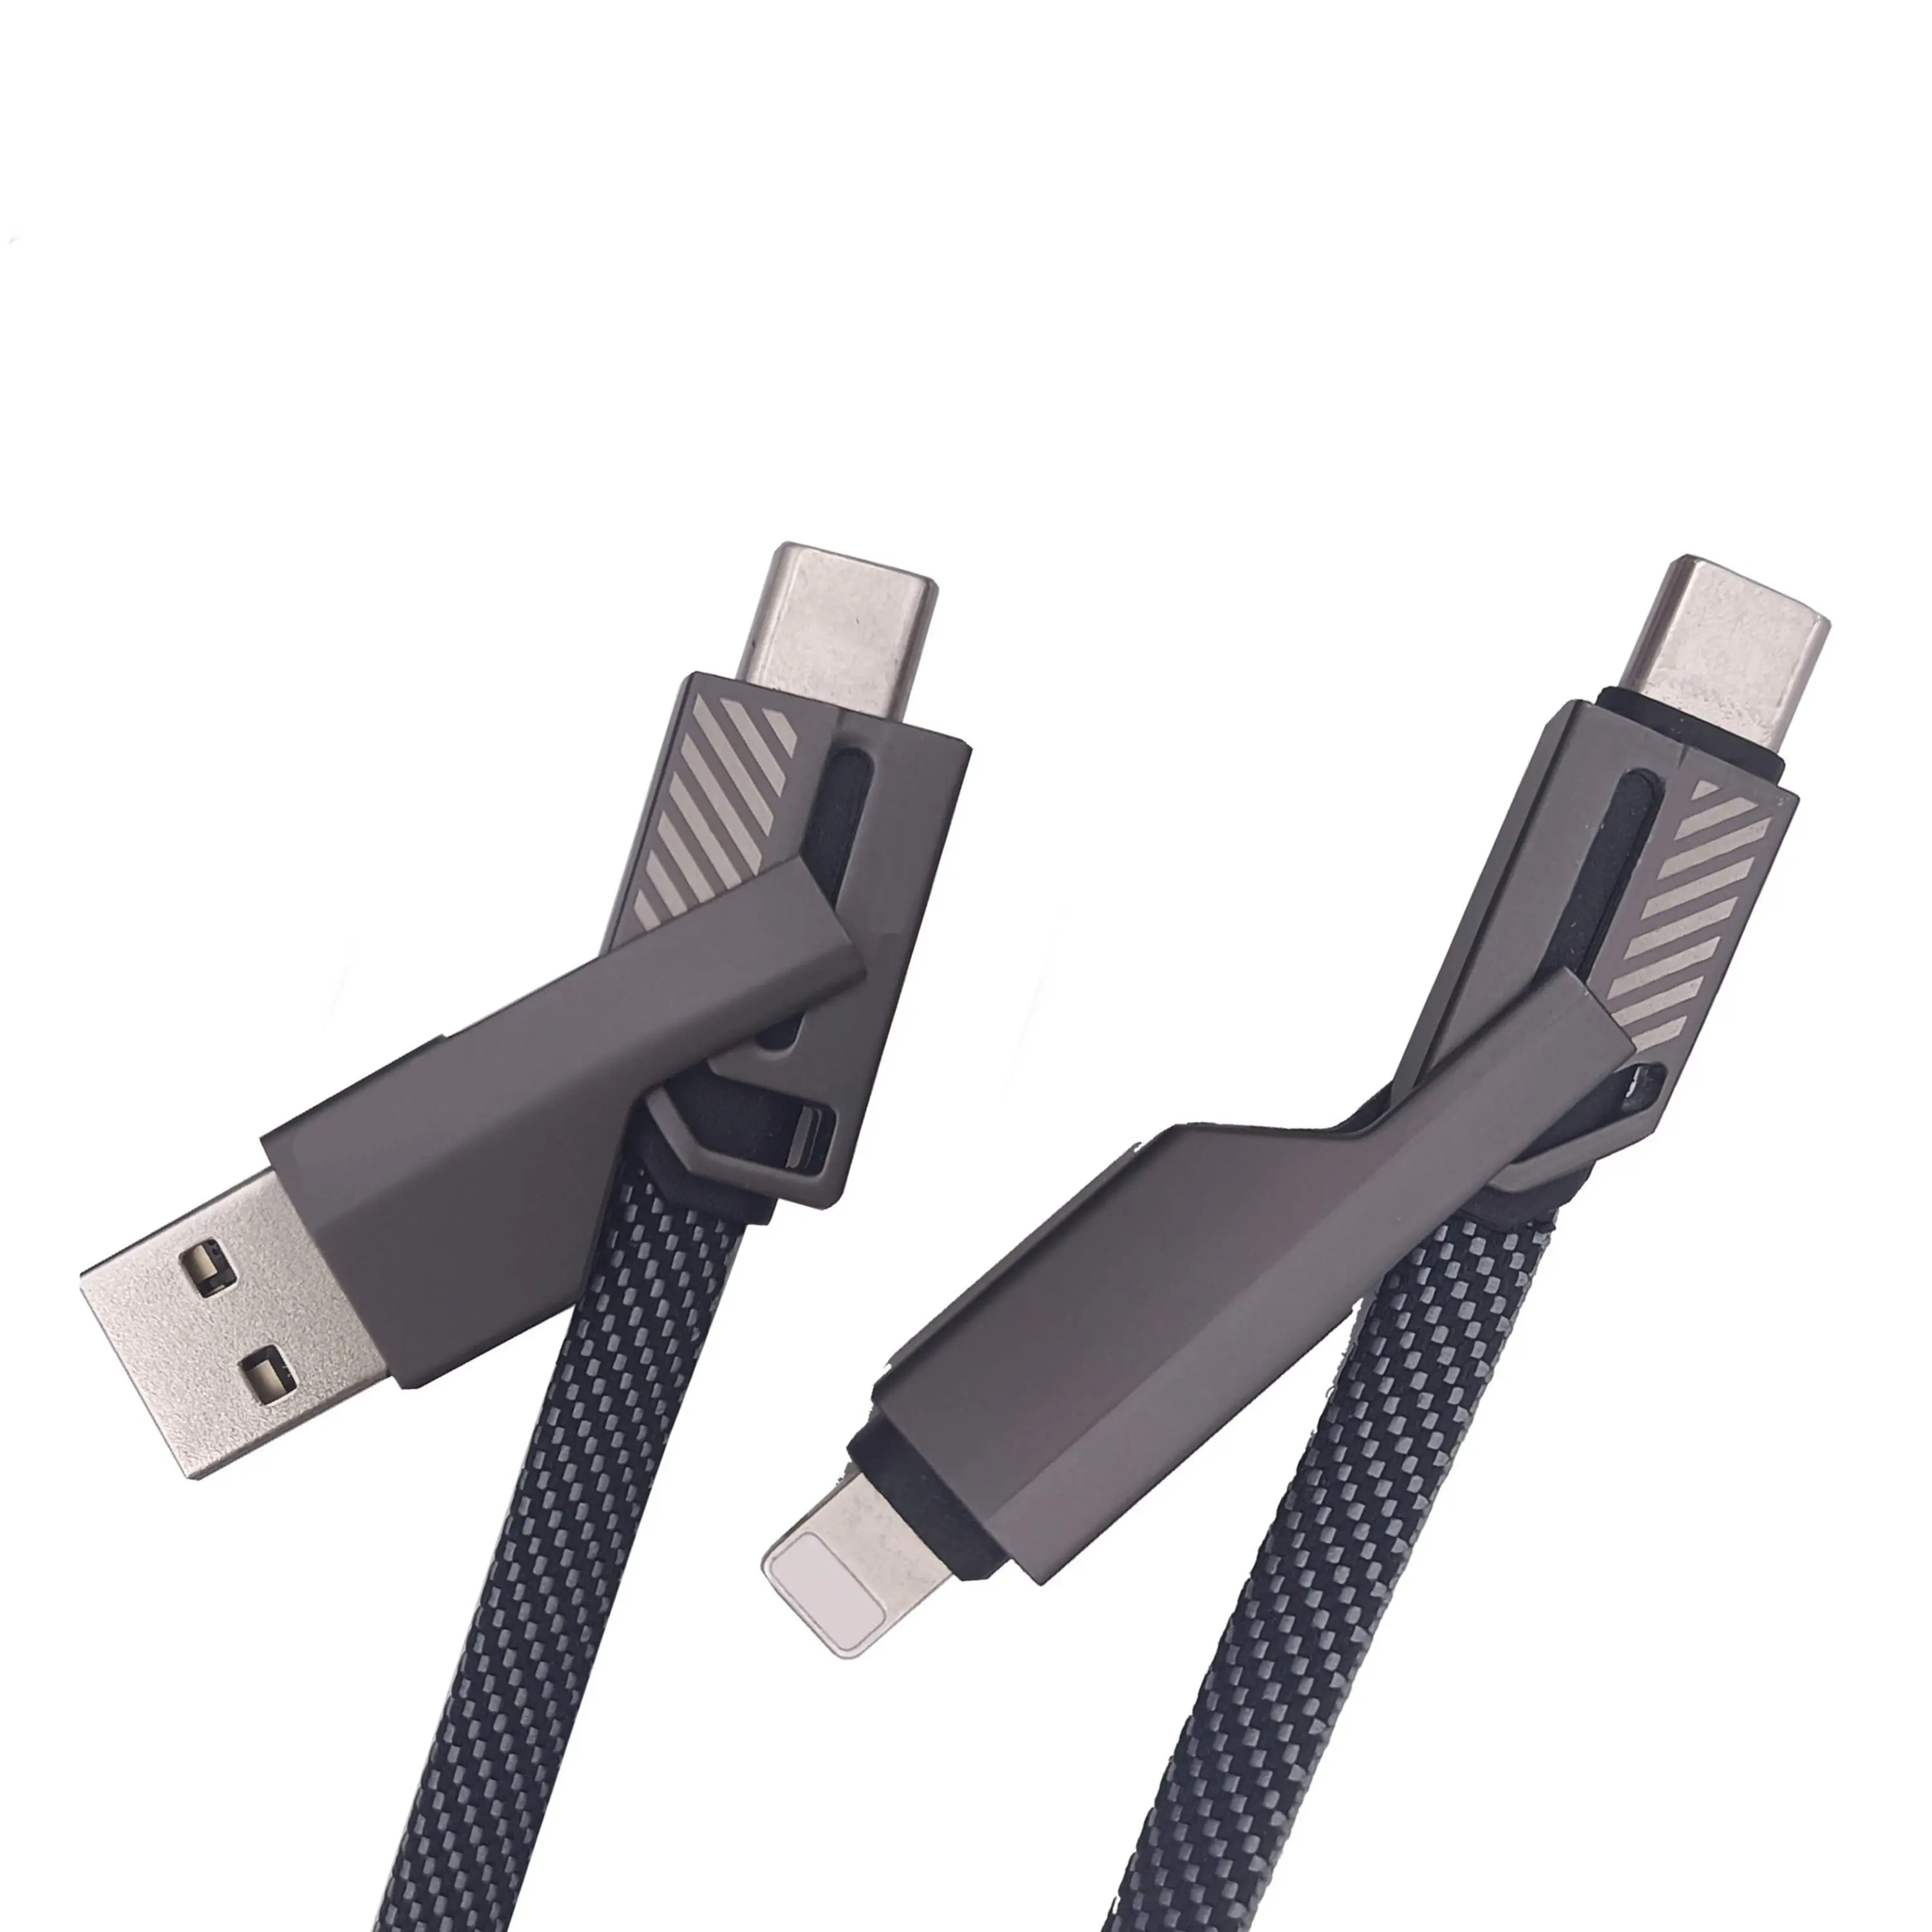 Trending New 4 In 1 Usb Data Cable Pd 100w Multi-function Usb Charging Cable For Mobile Phone Charger Cable